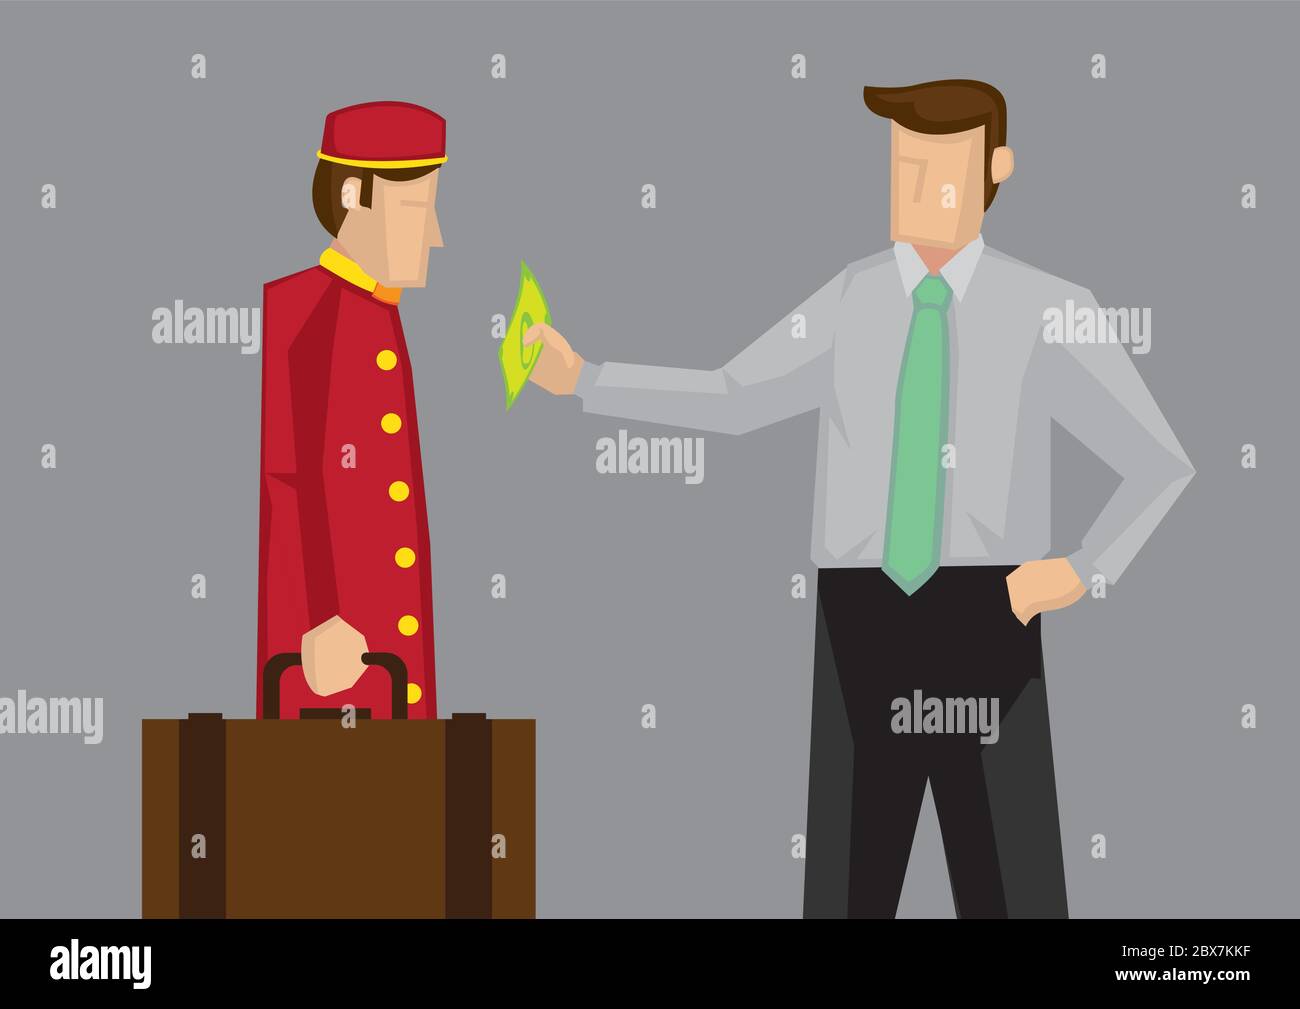 Satisfied customer giving a dollar note as tip to hotel porter for carrying his luggage. Vector illustration illustration isolated on grey background. Stock Vector